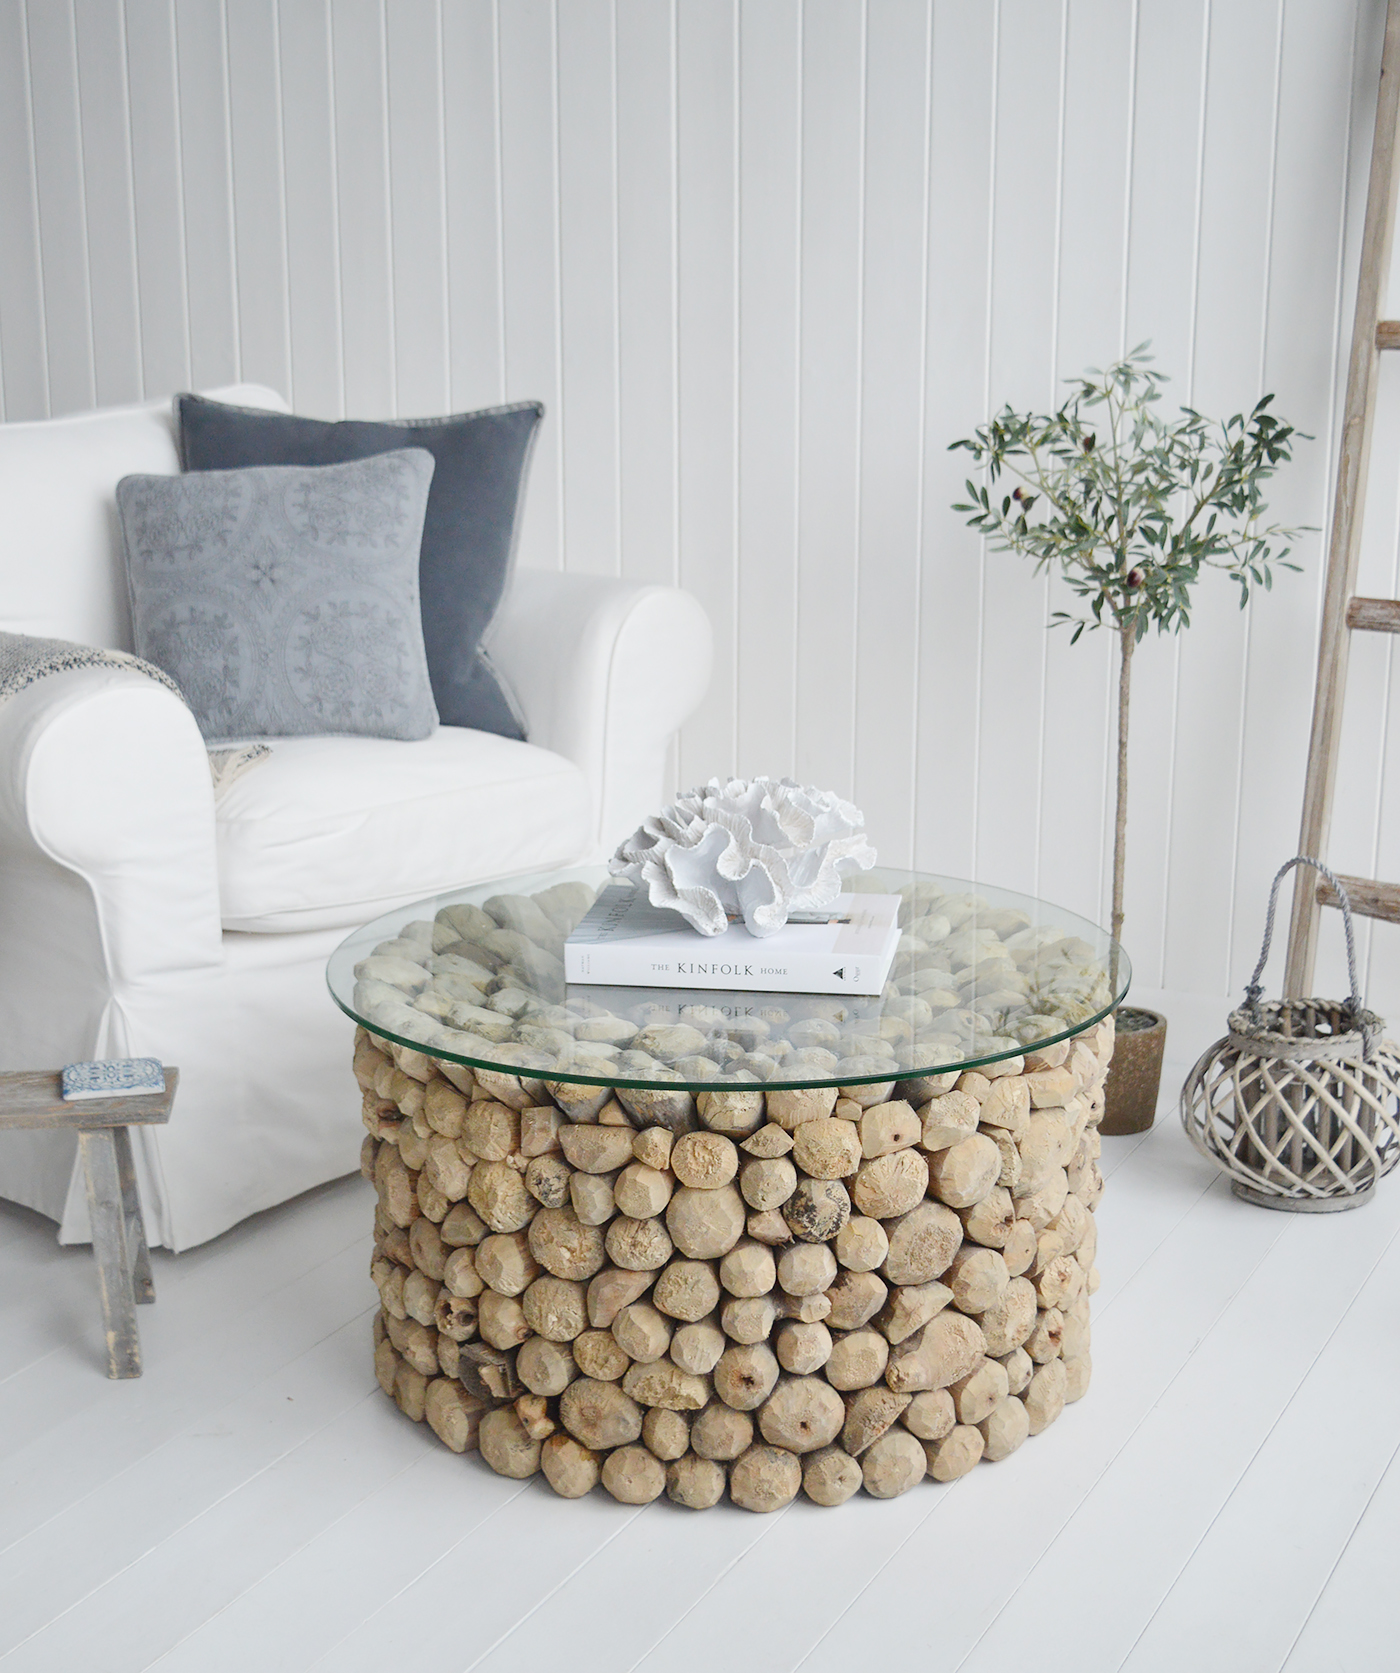 The Sag Harbor driftwood coffee table with a glass top, a stunning piece of coastal furniture for homes by the sea from The White Lighthouse for New England style interiors